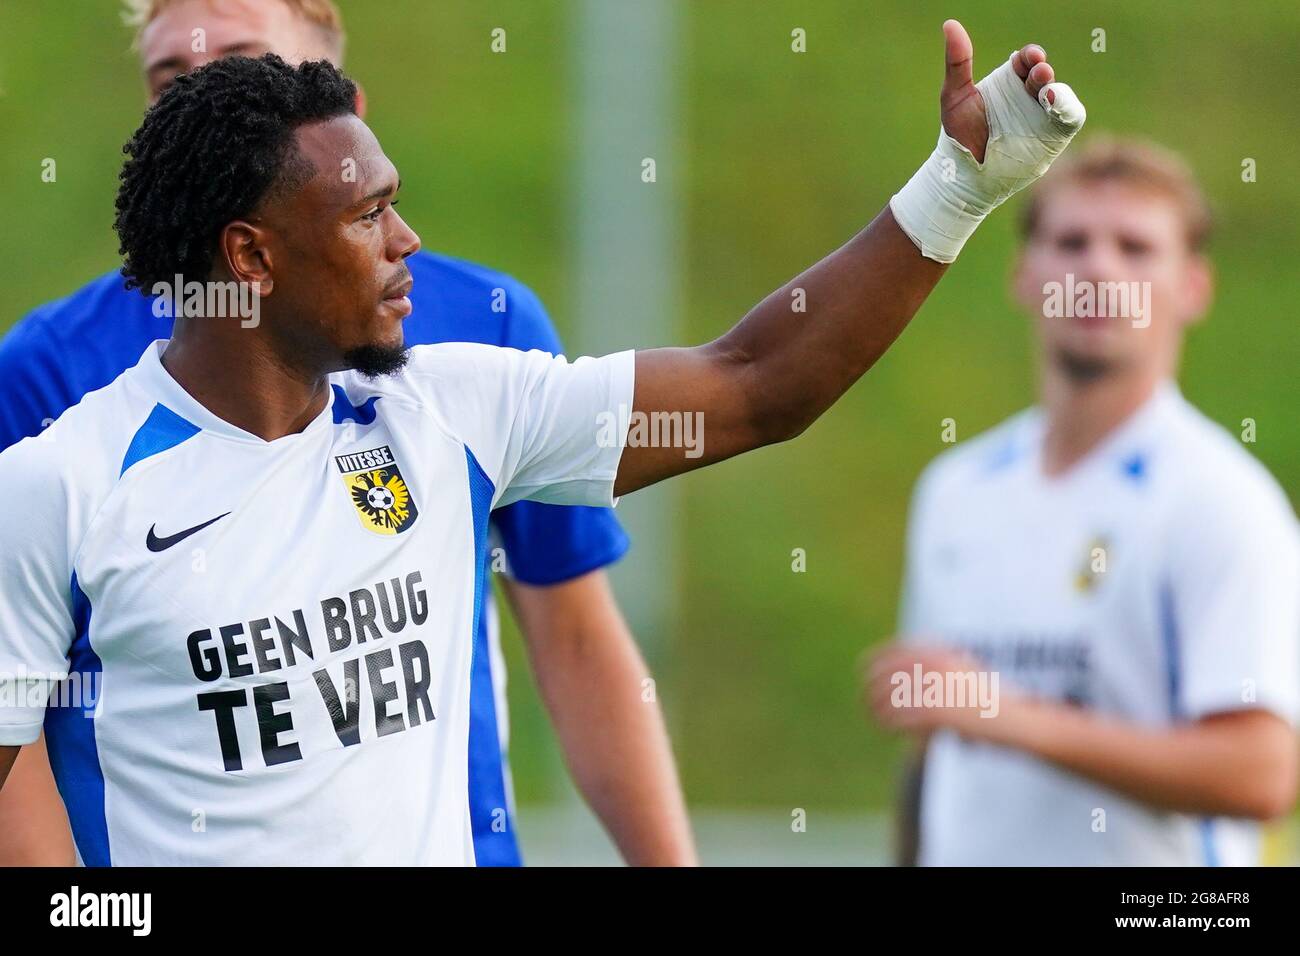 GELSENKIRCHEN, GERMANY - JULY 16: Lois Openda of Vitesse during the Club Friendly match between FC Schalke 04 and Vitesse at Parkstadion on July 16, 2021 in Gelsenkirchen, Germany (Photo by Joris Verwijst/Orange Pictures) Stock Photo